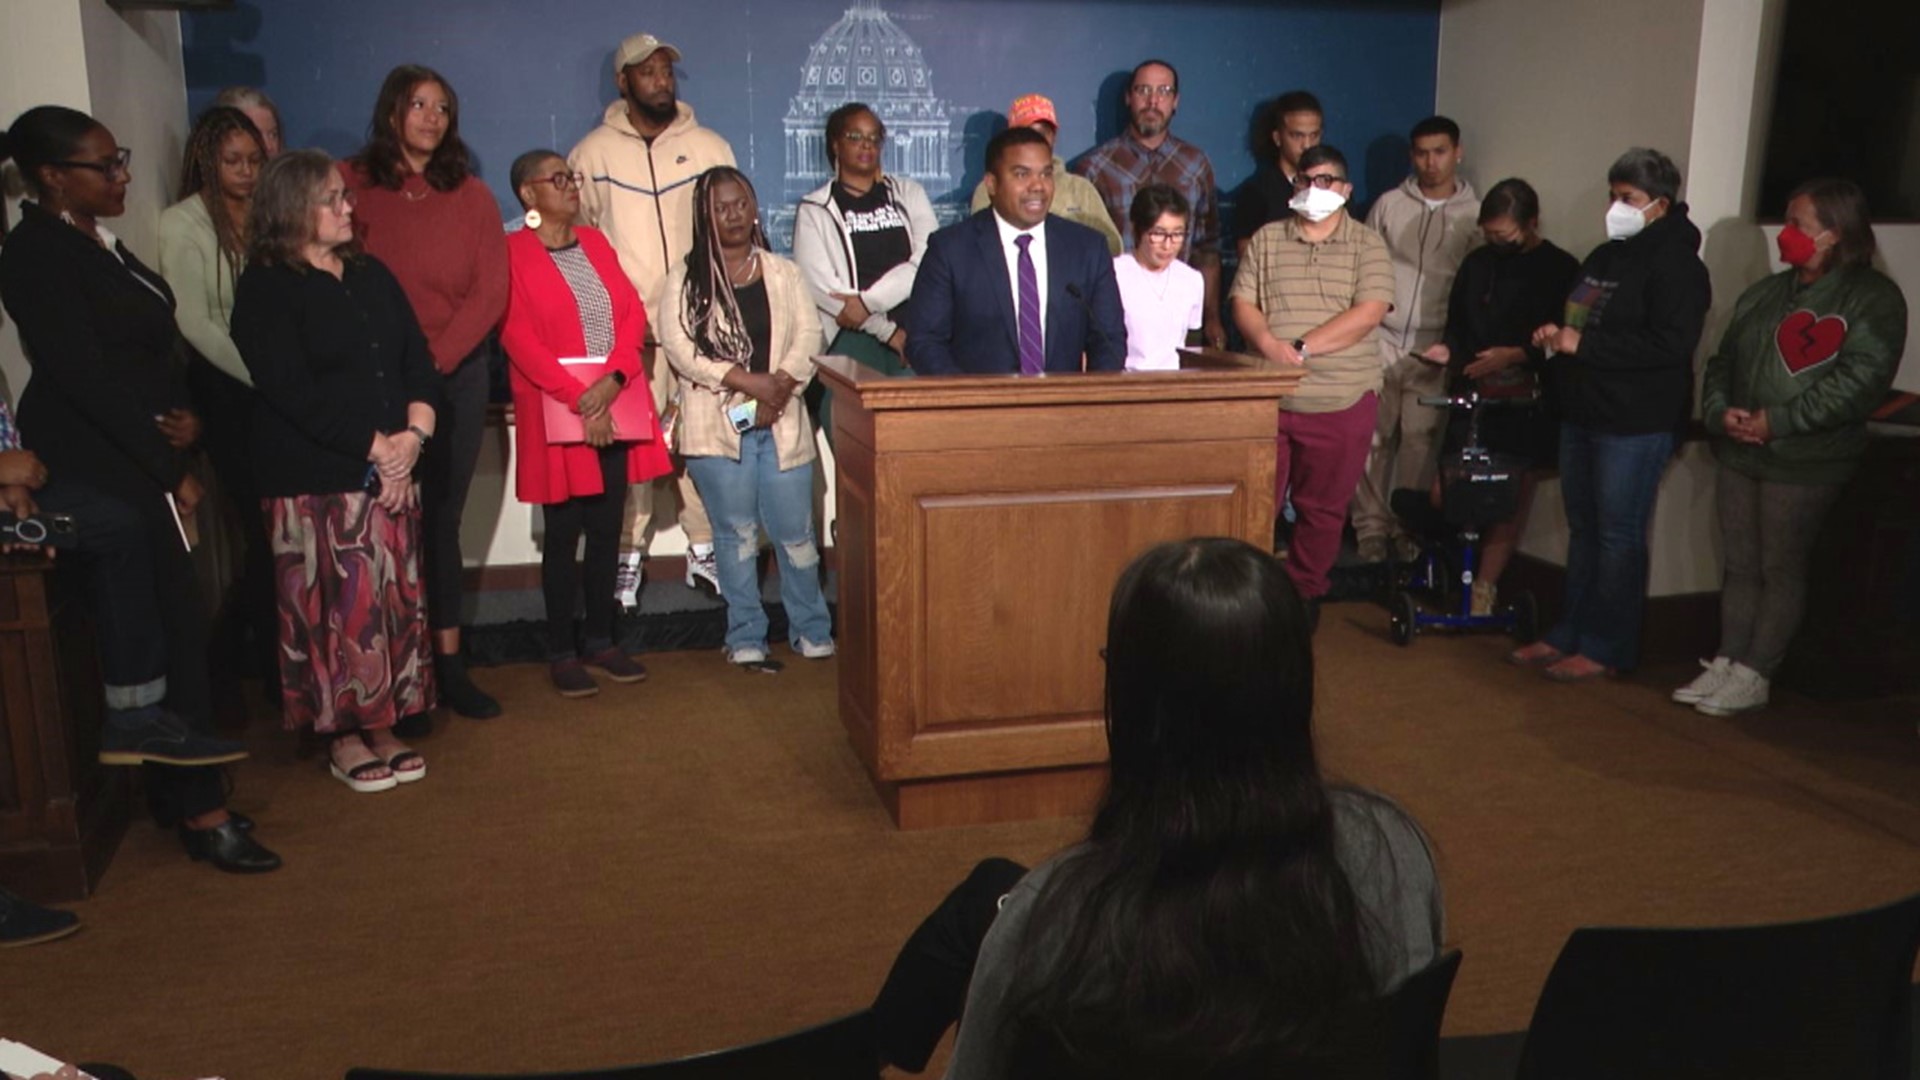 A coalition of educators, advocates, and parents defended the new ban on school employees using physical restraints and prone holds on students in Minnesota.